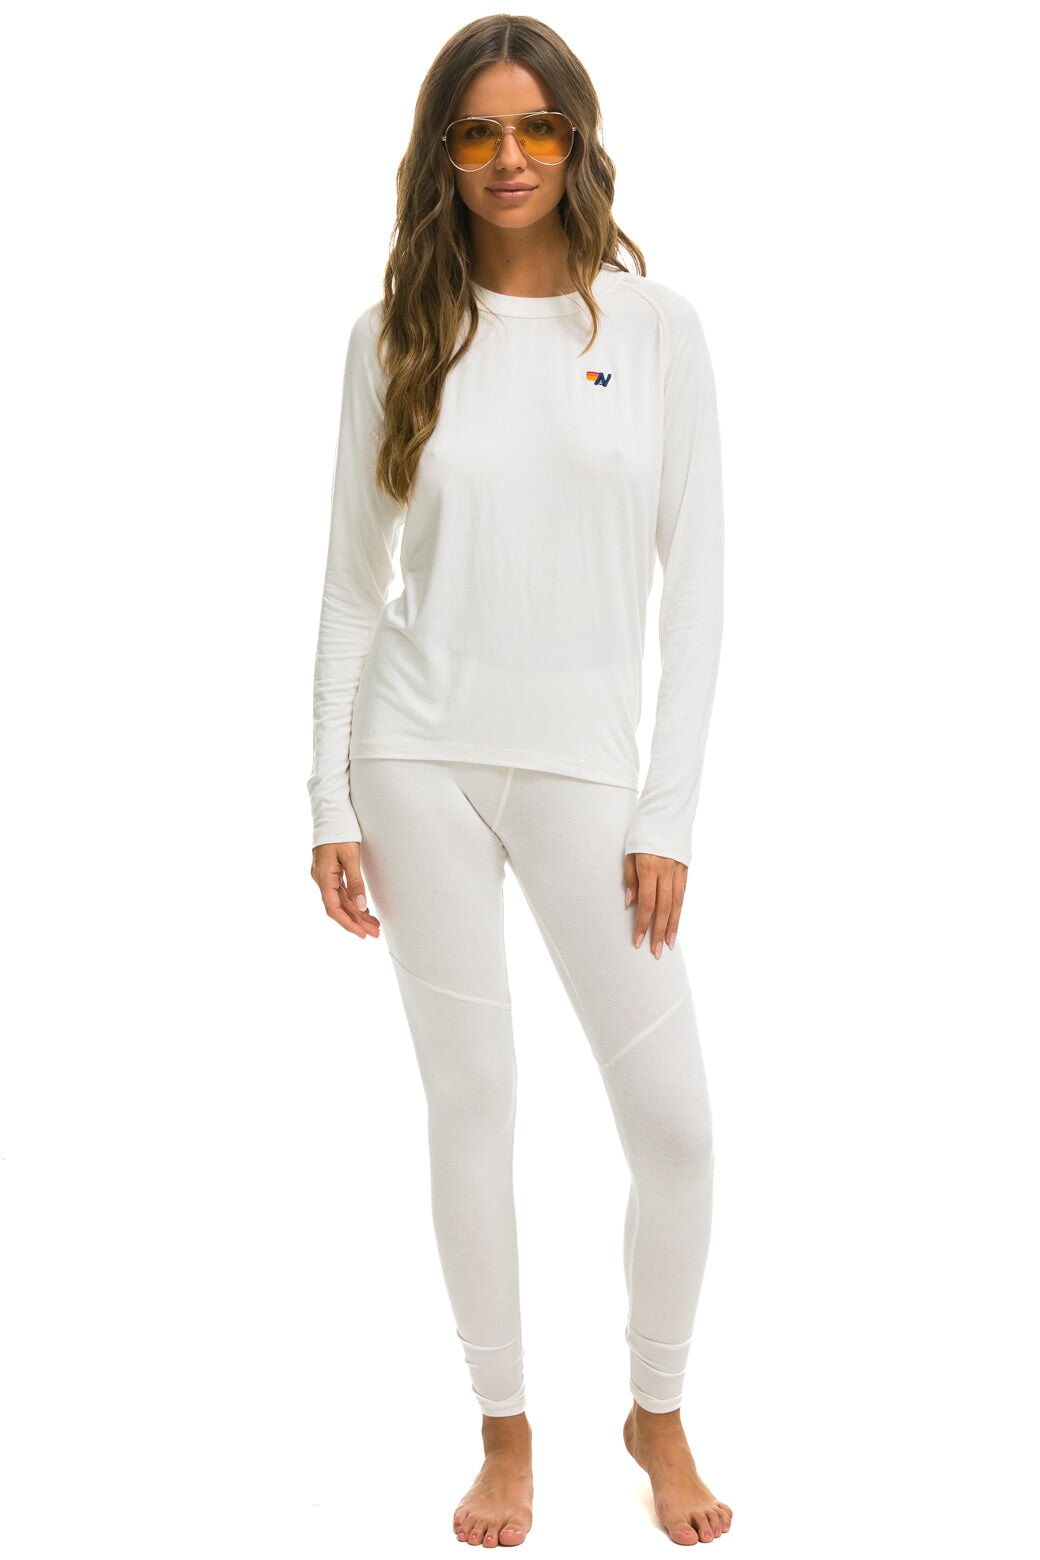 Find all baselayer wear here – SELECT